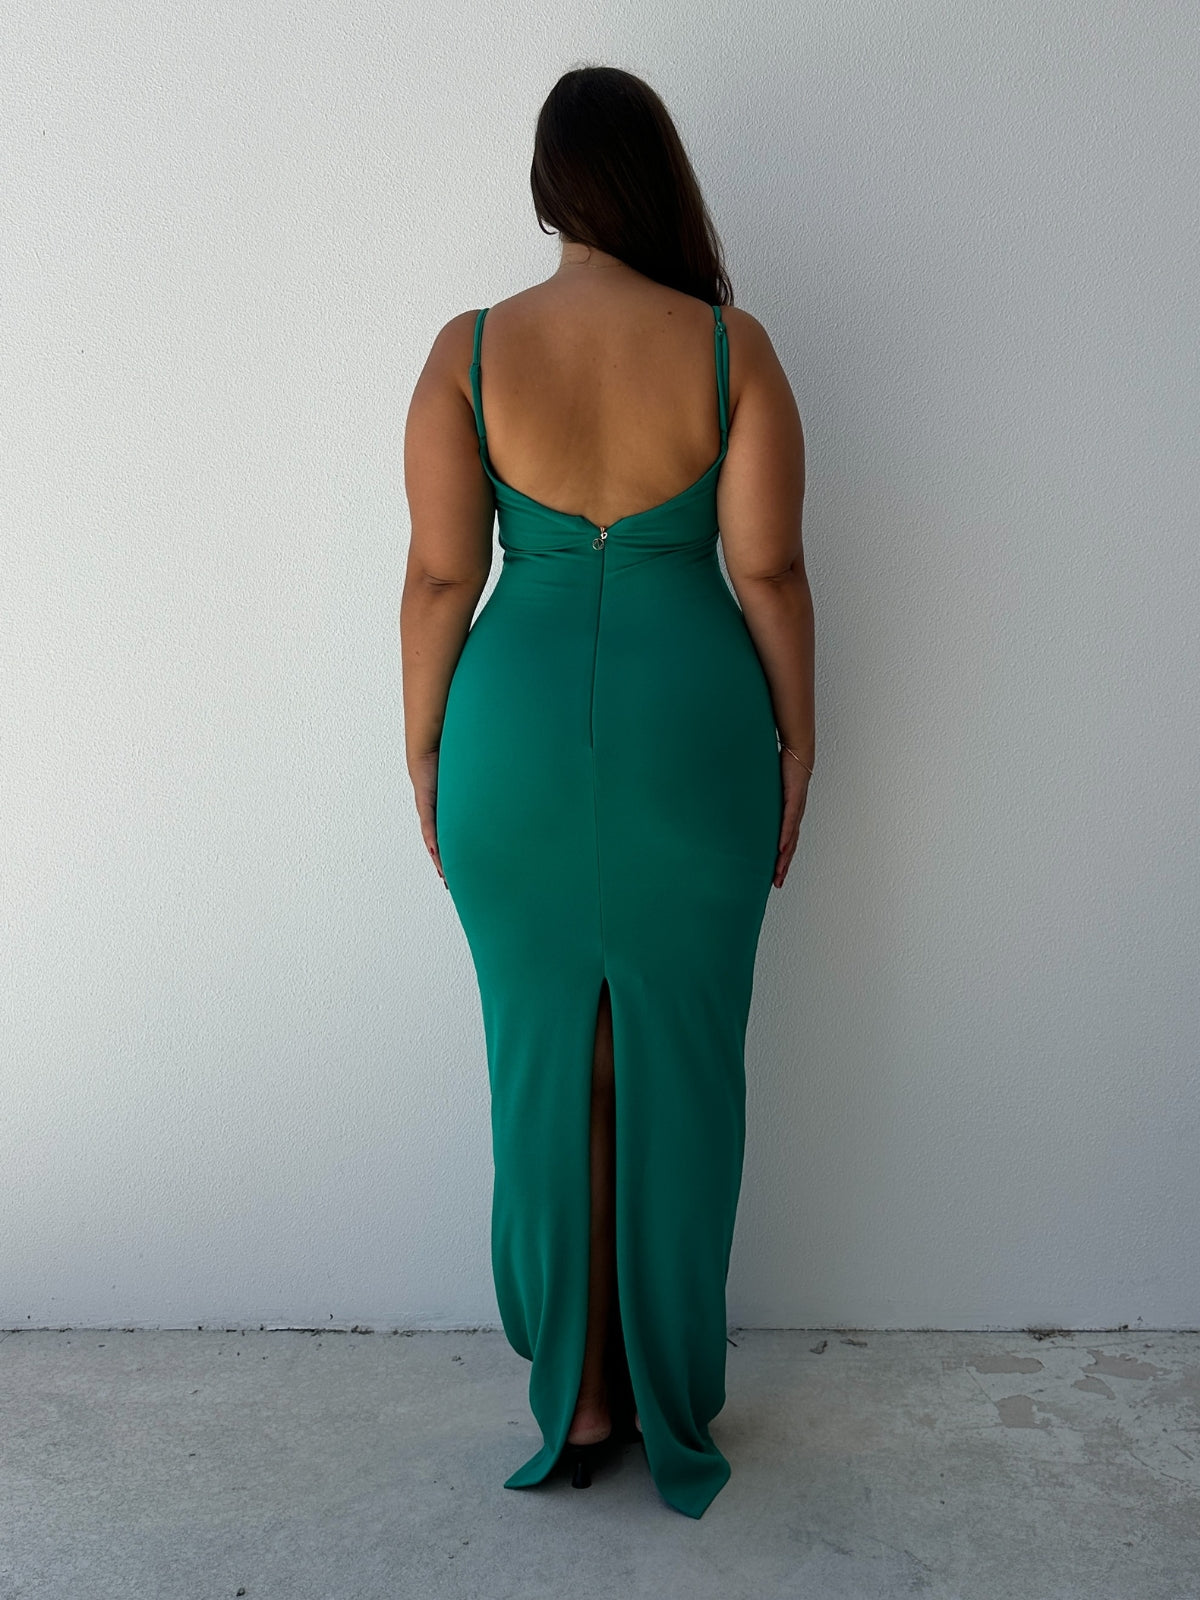 Bailey Gown - Emerald